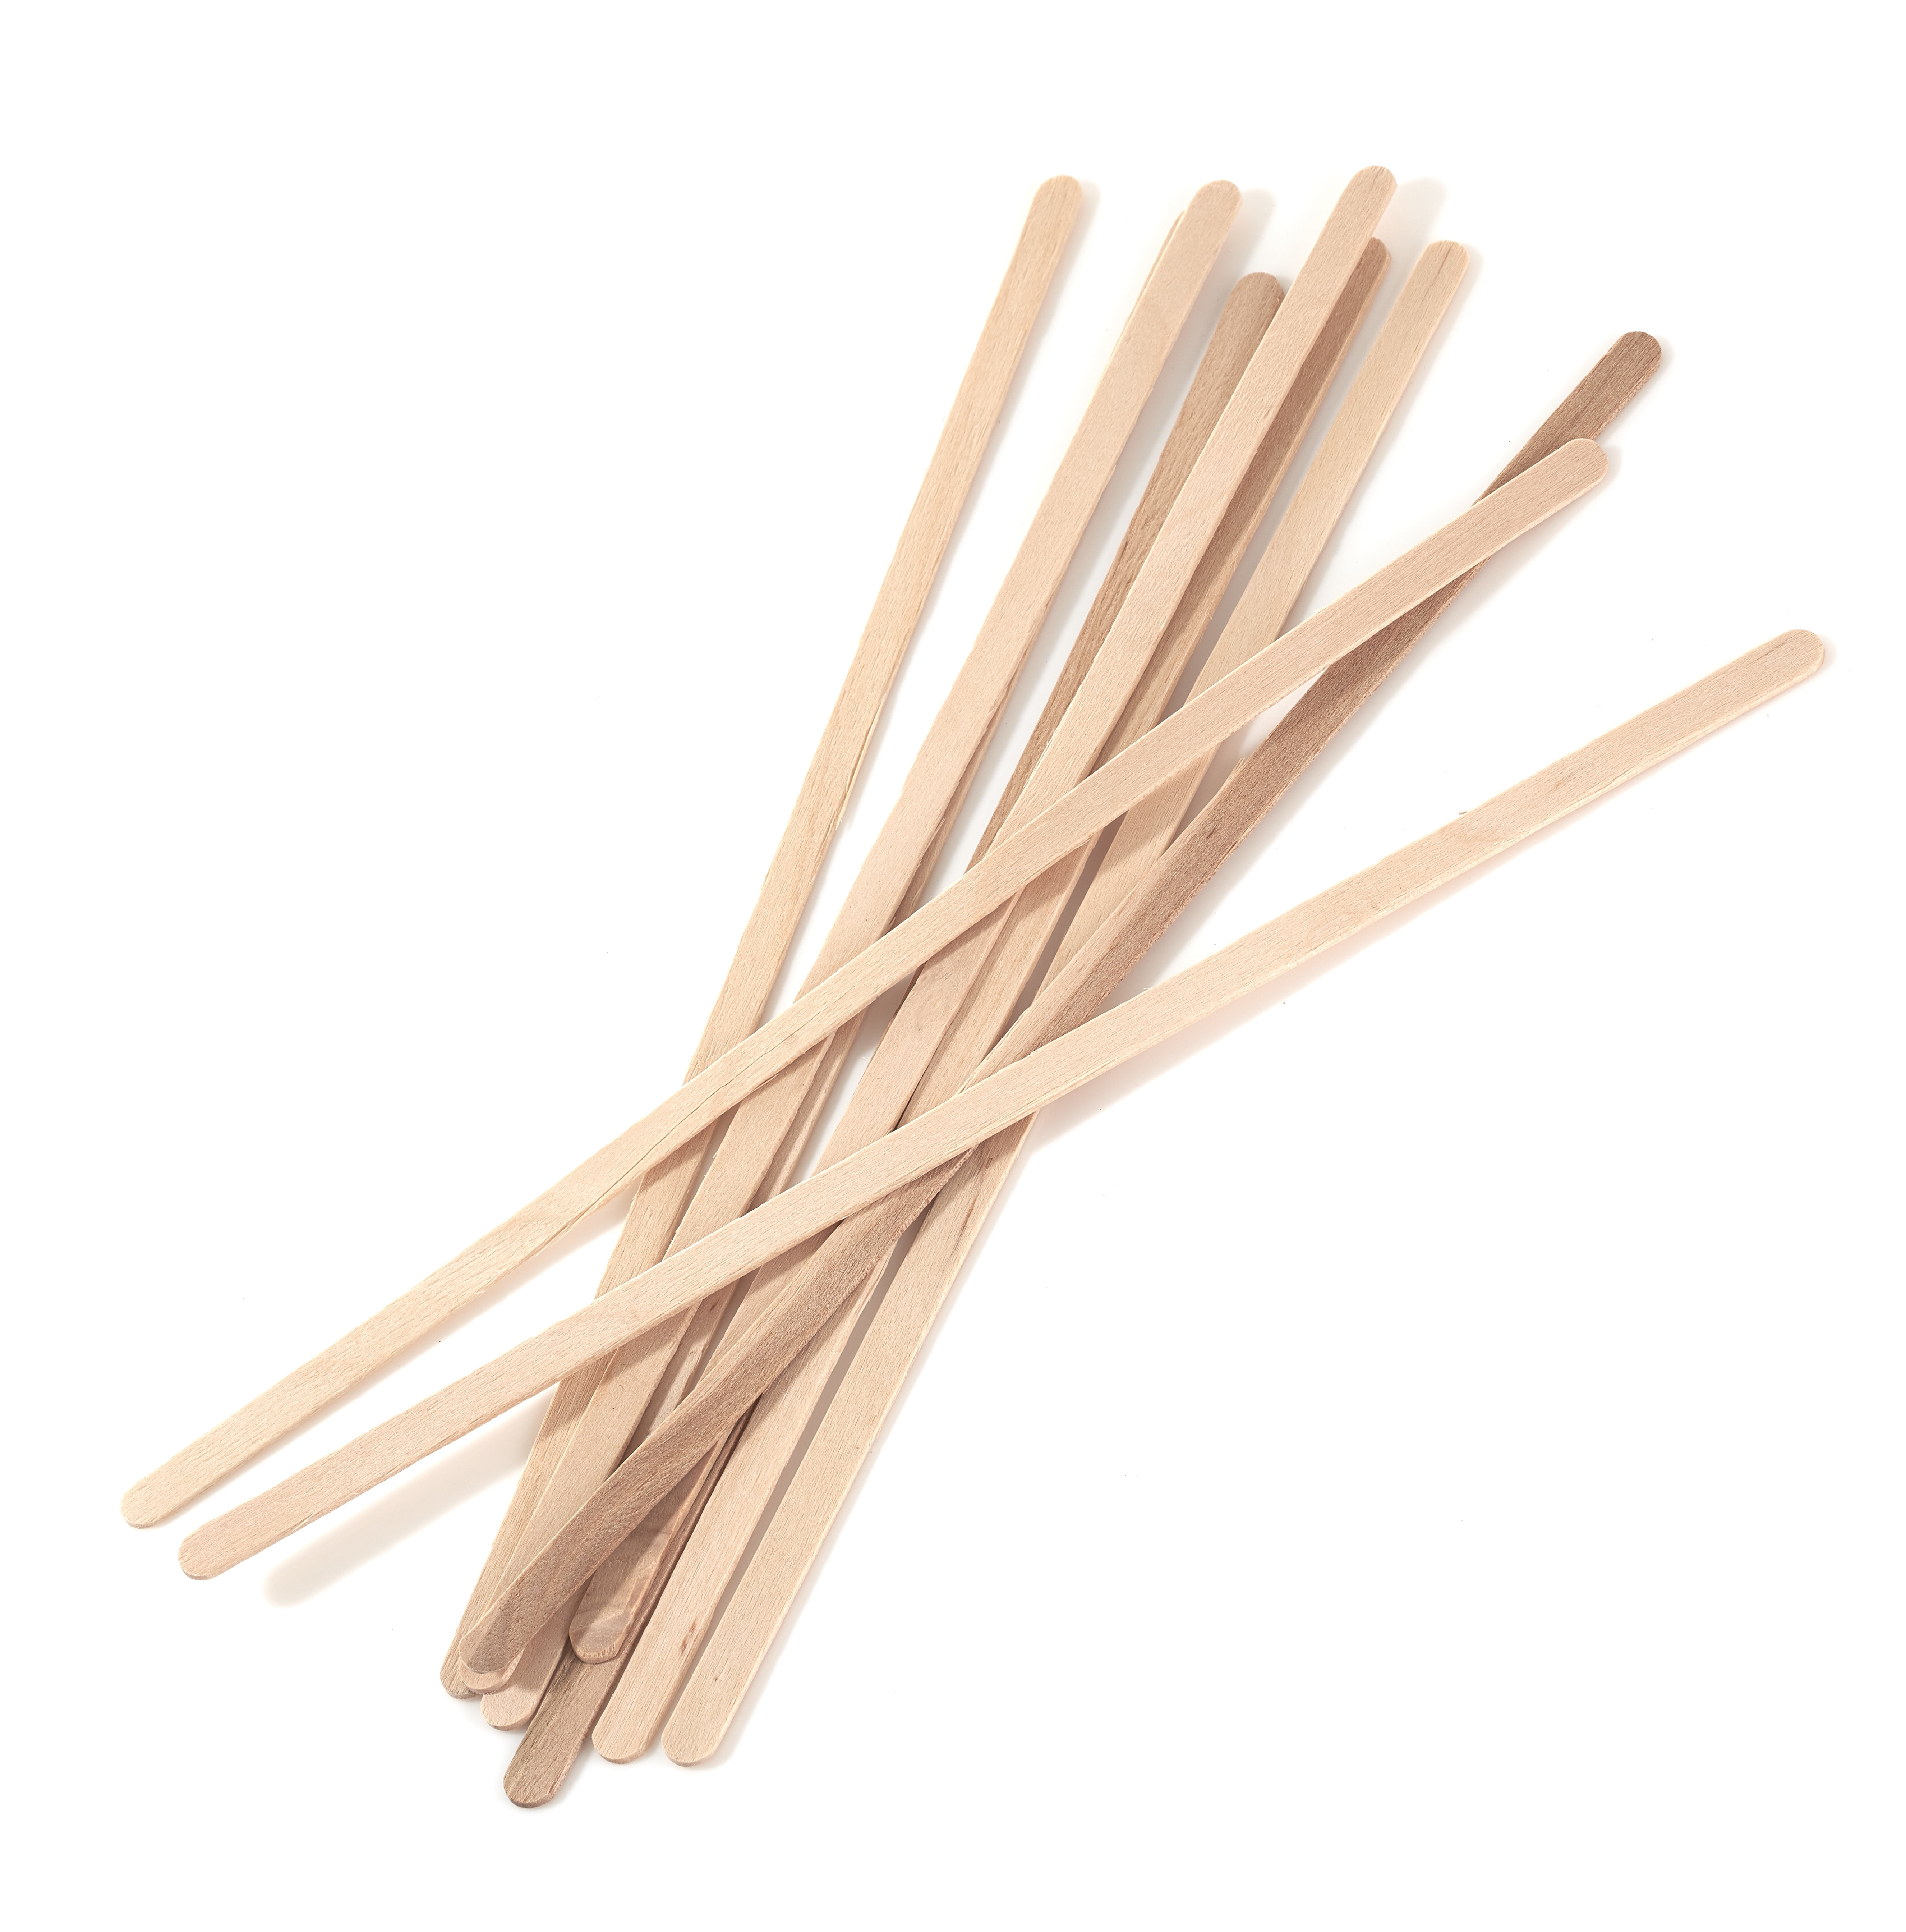 Restaurantware 7 Inch Coffee Stirrers, 100 Disposable Coffee Stir Sticks -  Square Top, Sturdy, Natural Bamboo Drink Stirrers, Stirrers For Hot & Cold